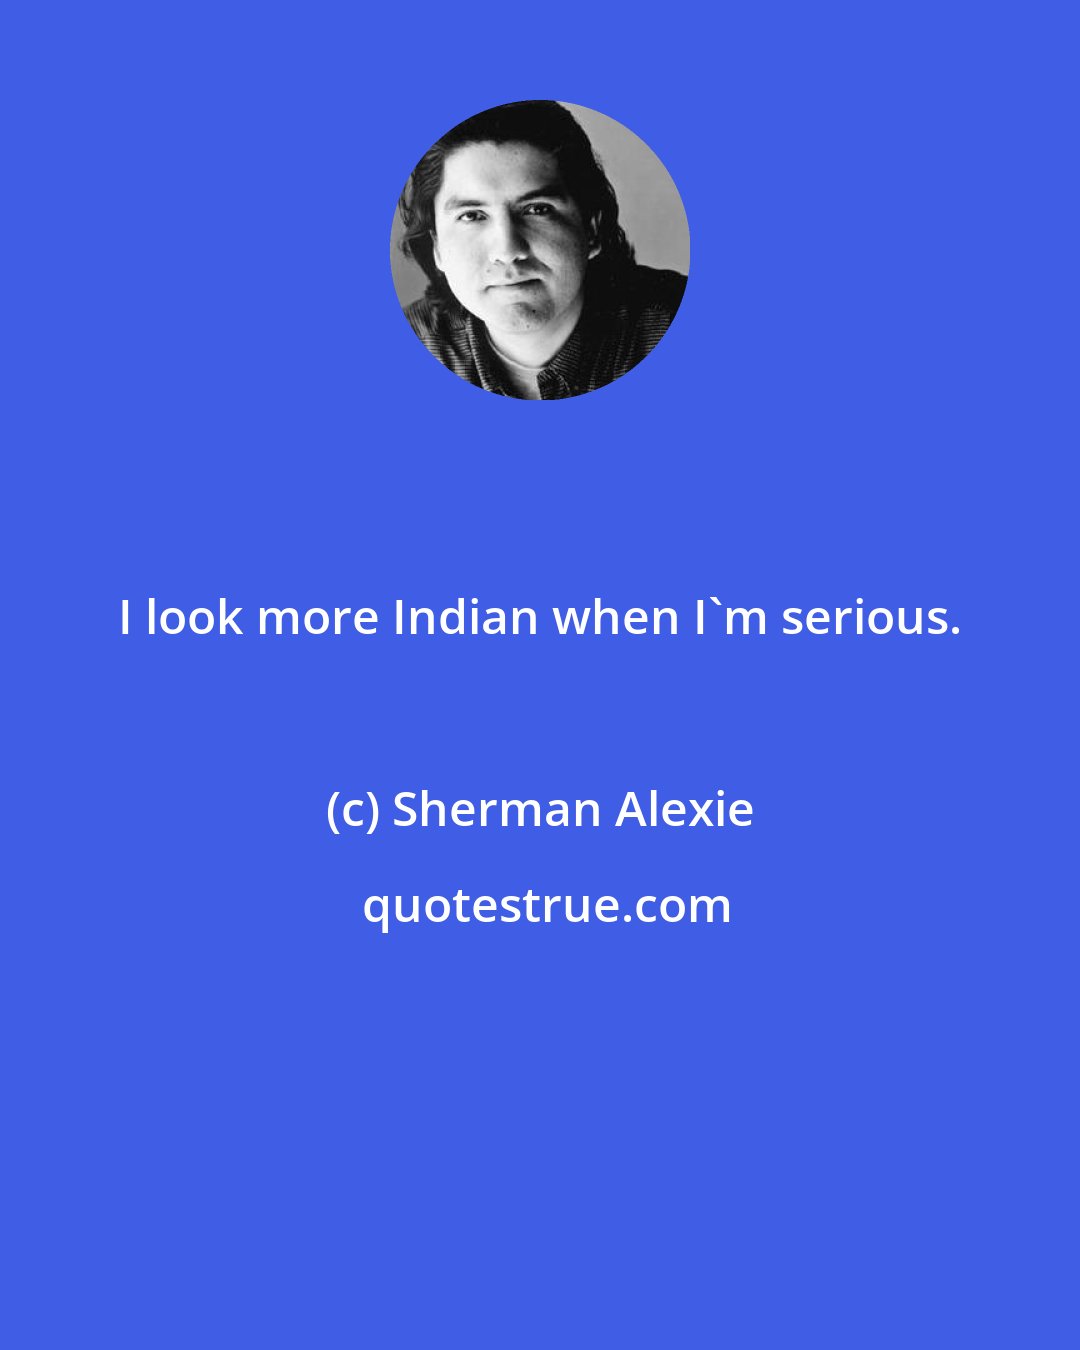 Sherman Alexie: I look more Indian when I'm serious.